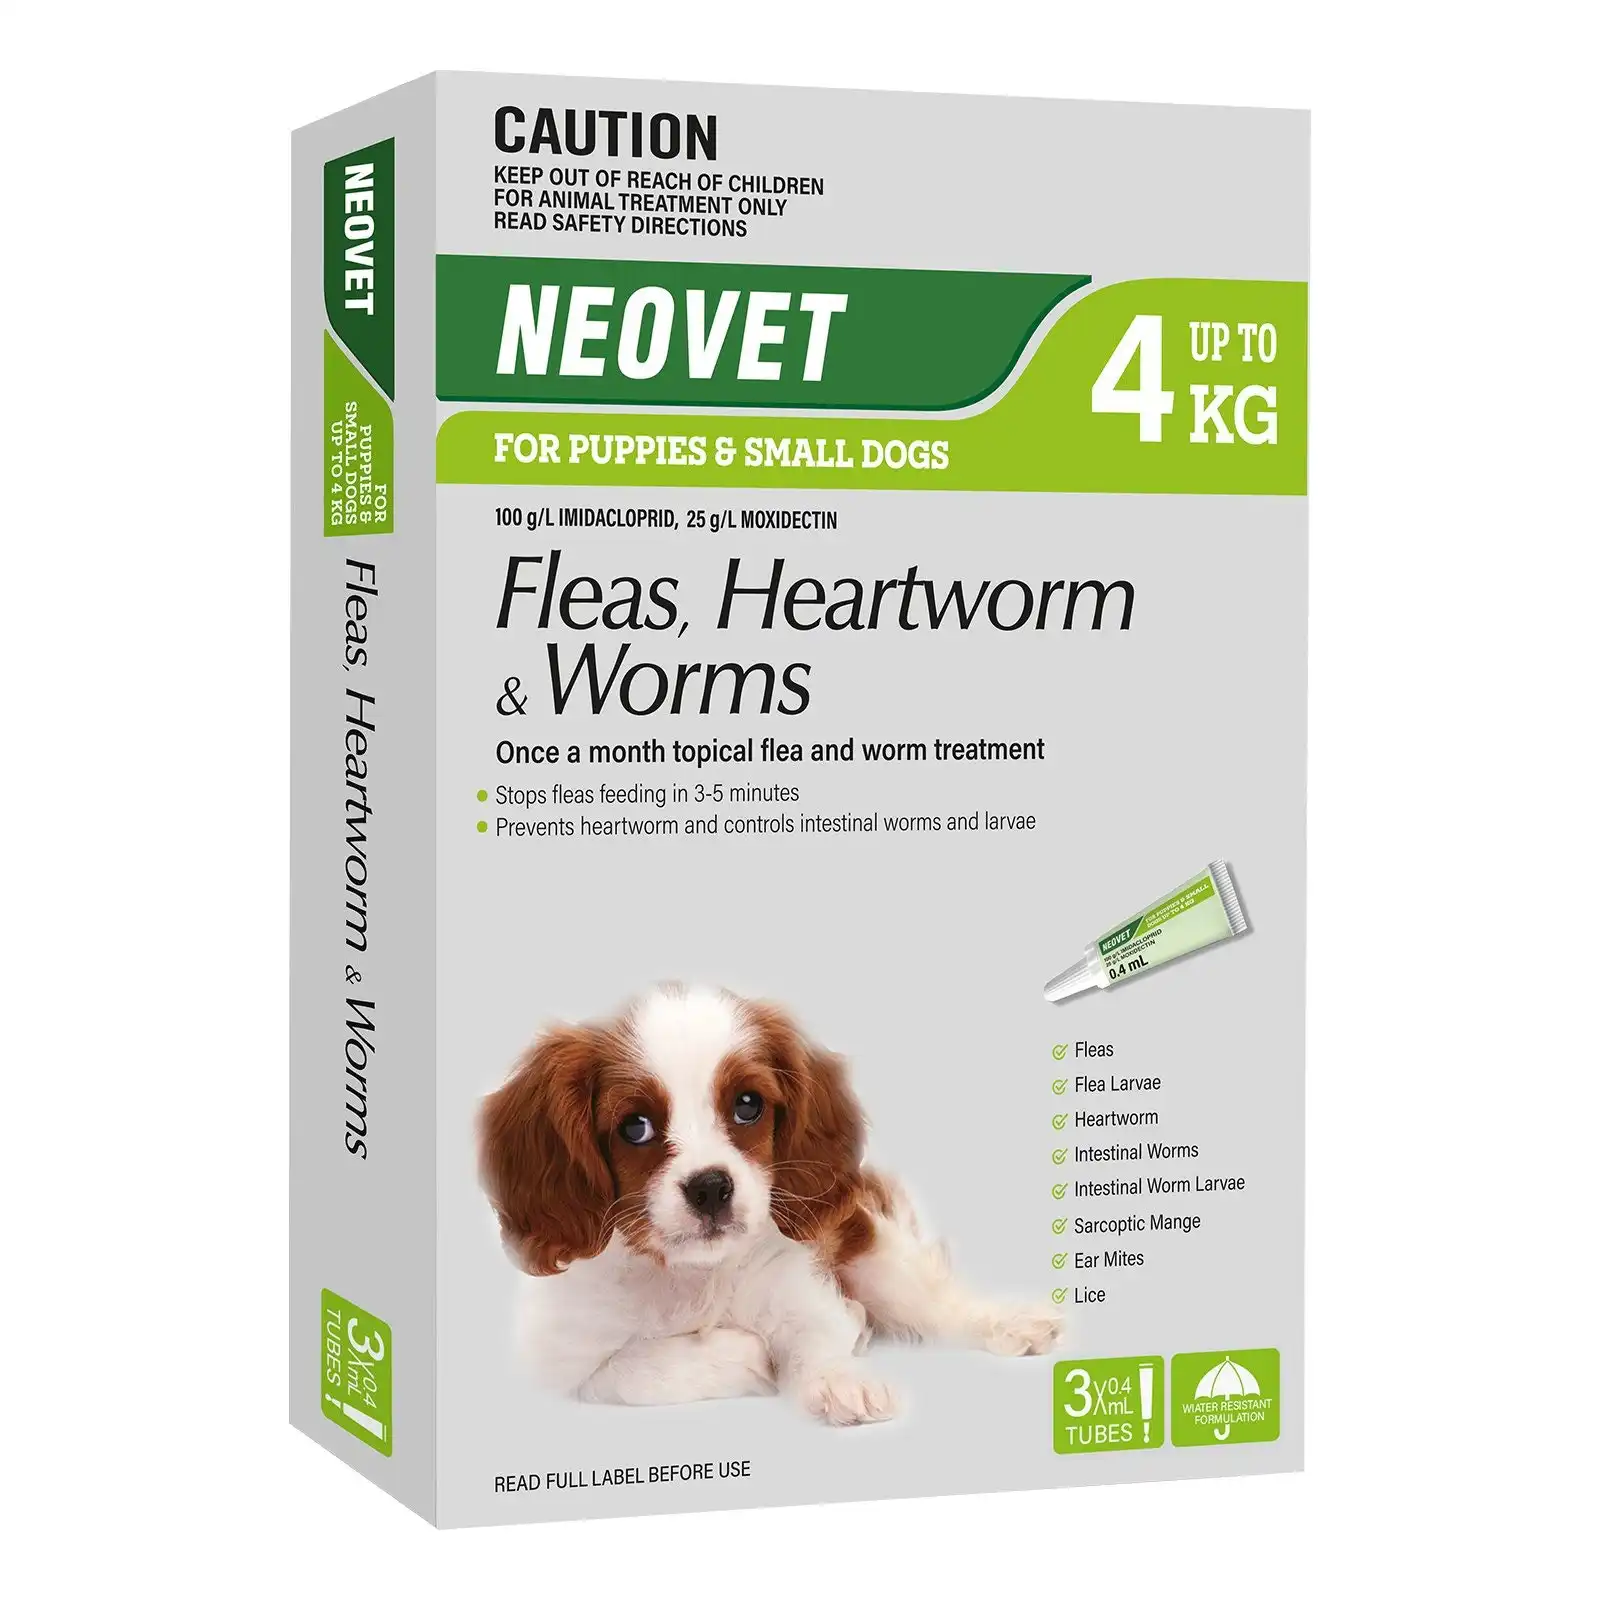 Neovet - Generic Advocate for Puppies and Small Dogs Up To 4 Kg (GREEN) 3 Pack